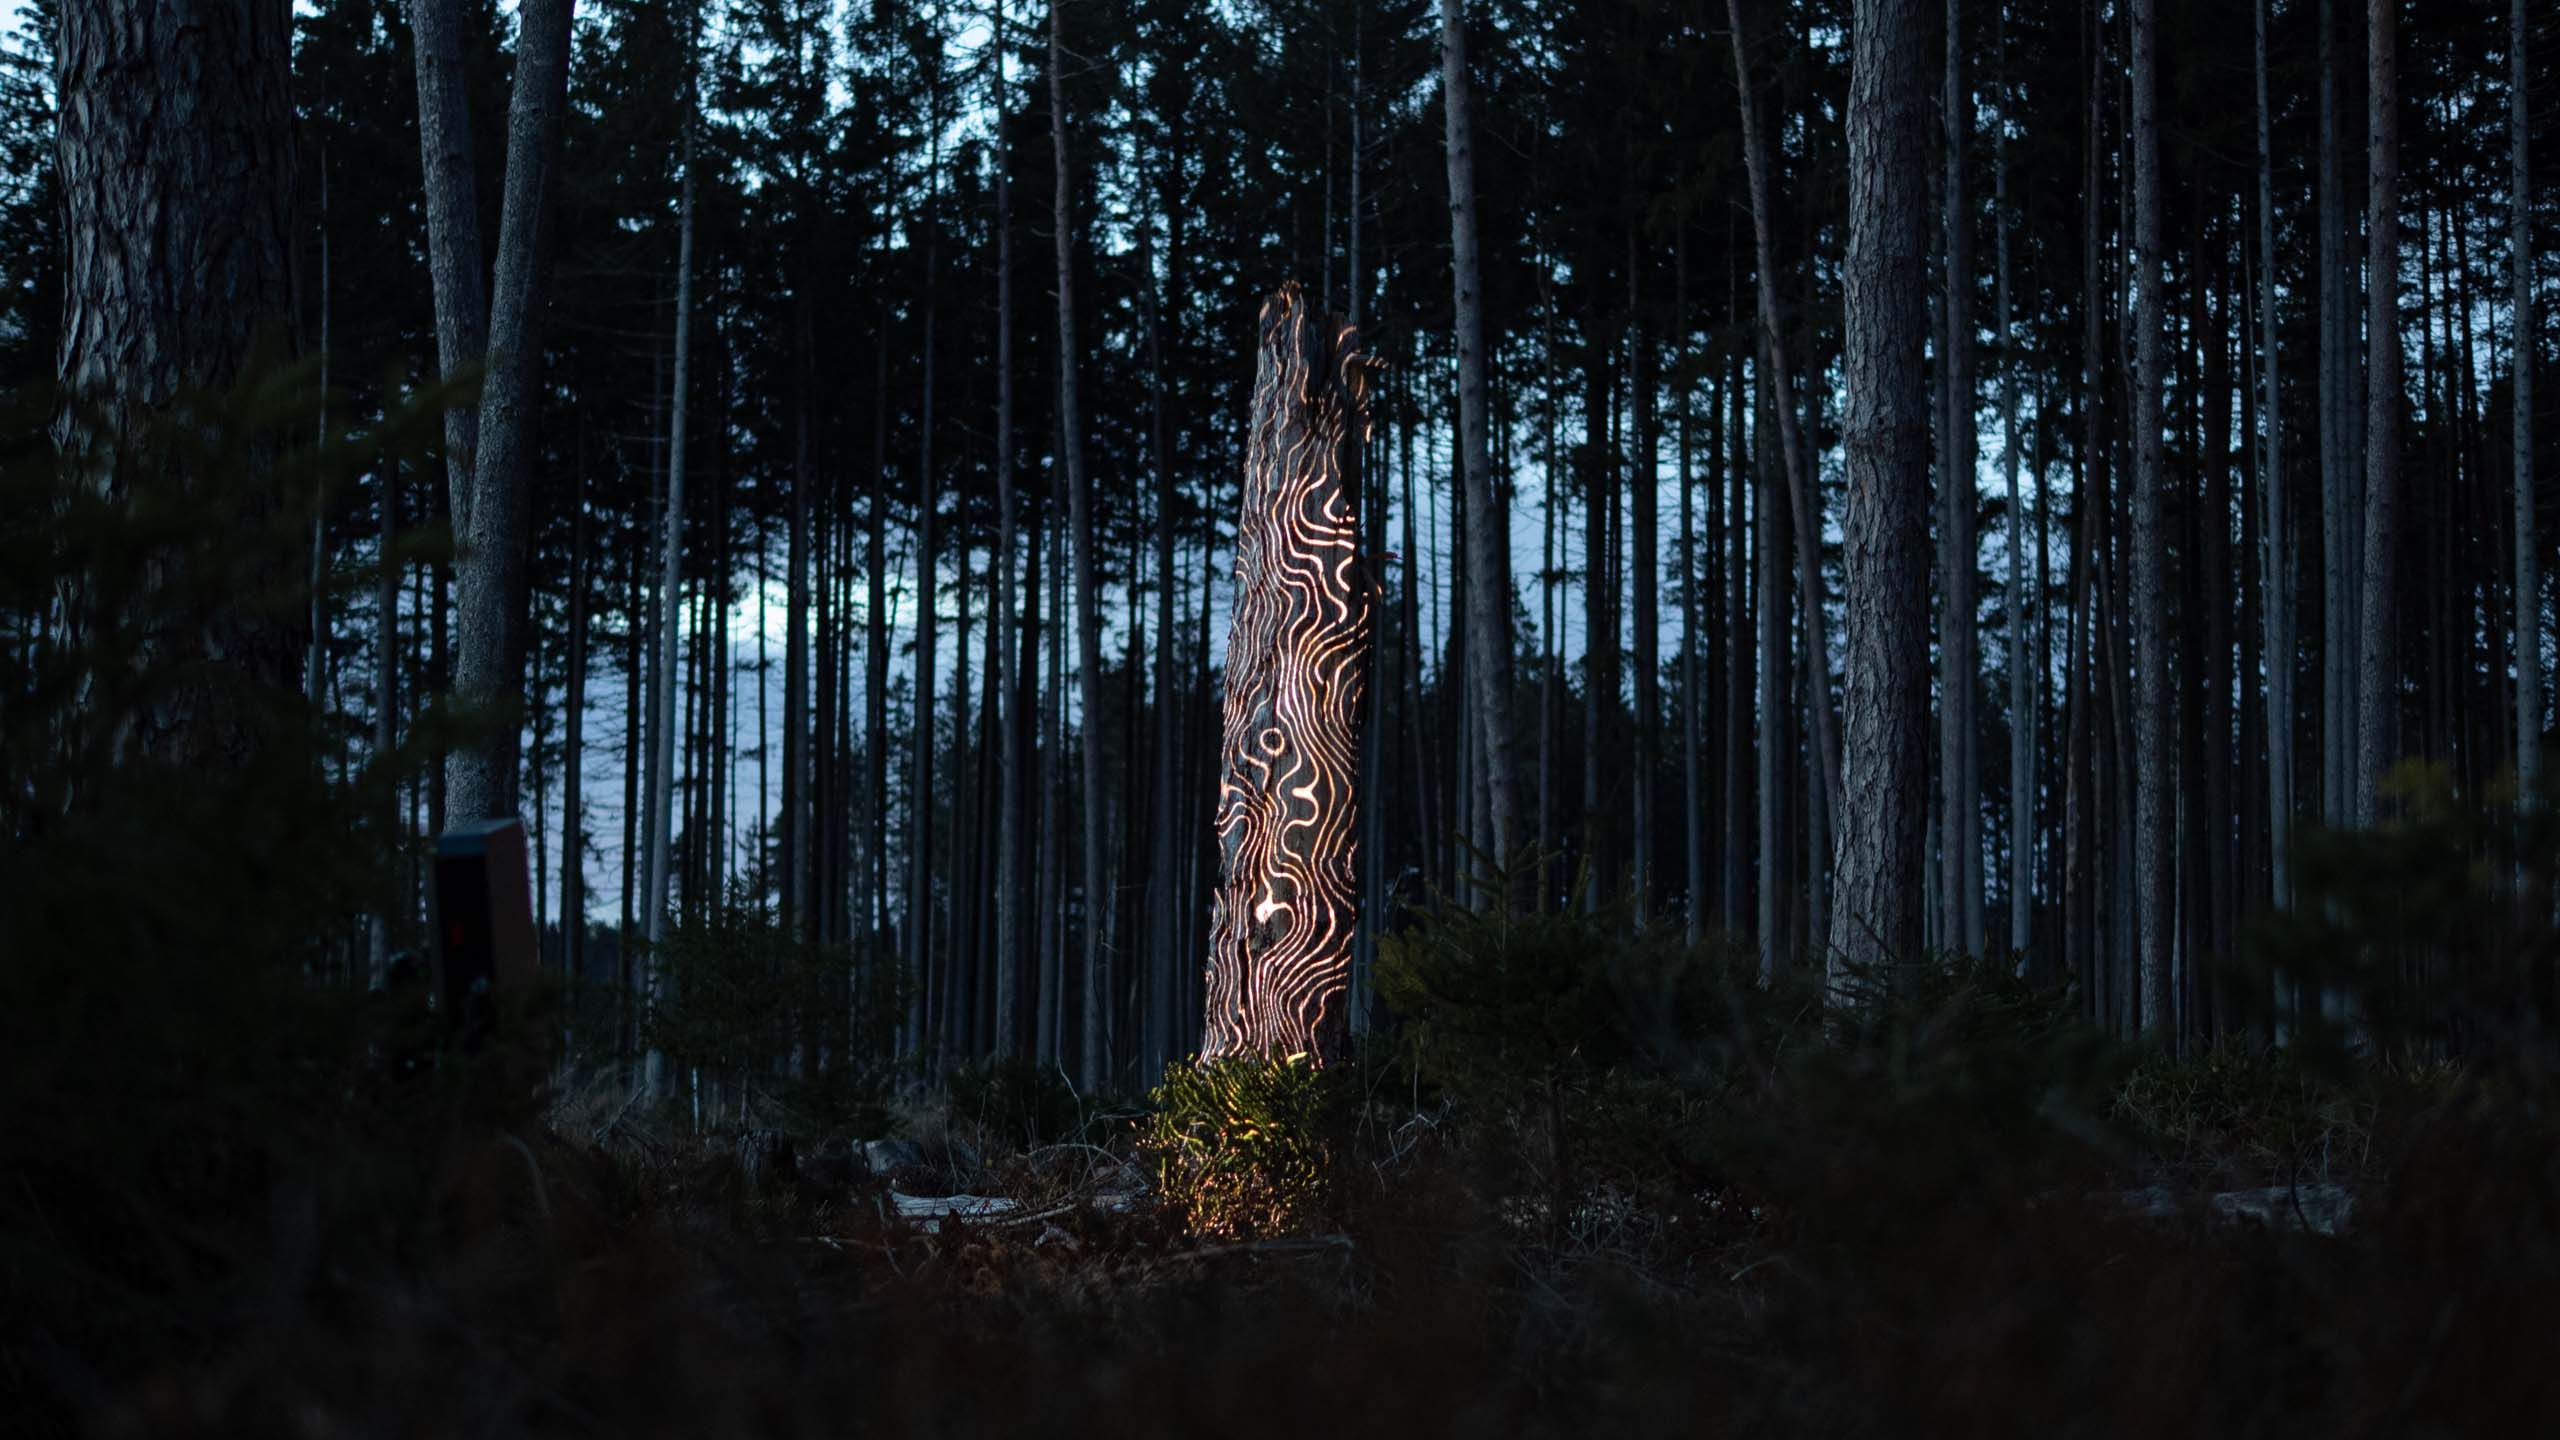 Projection mapping on a tree trunk